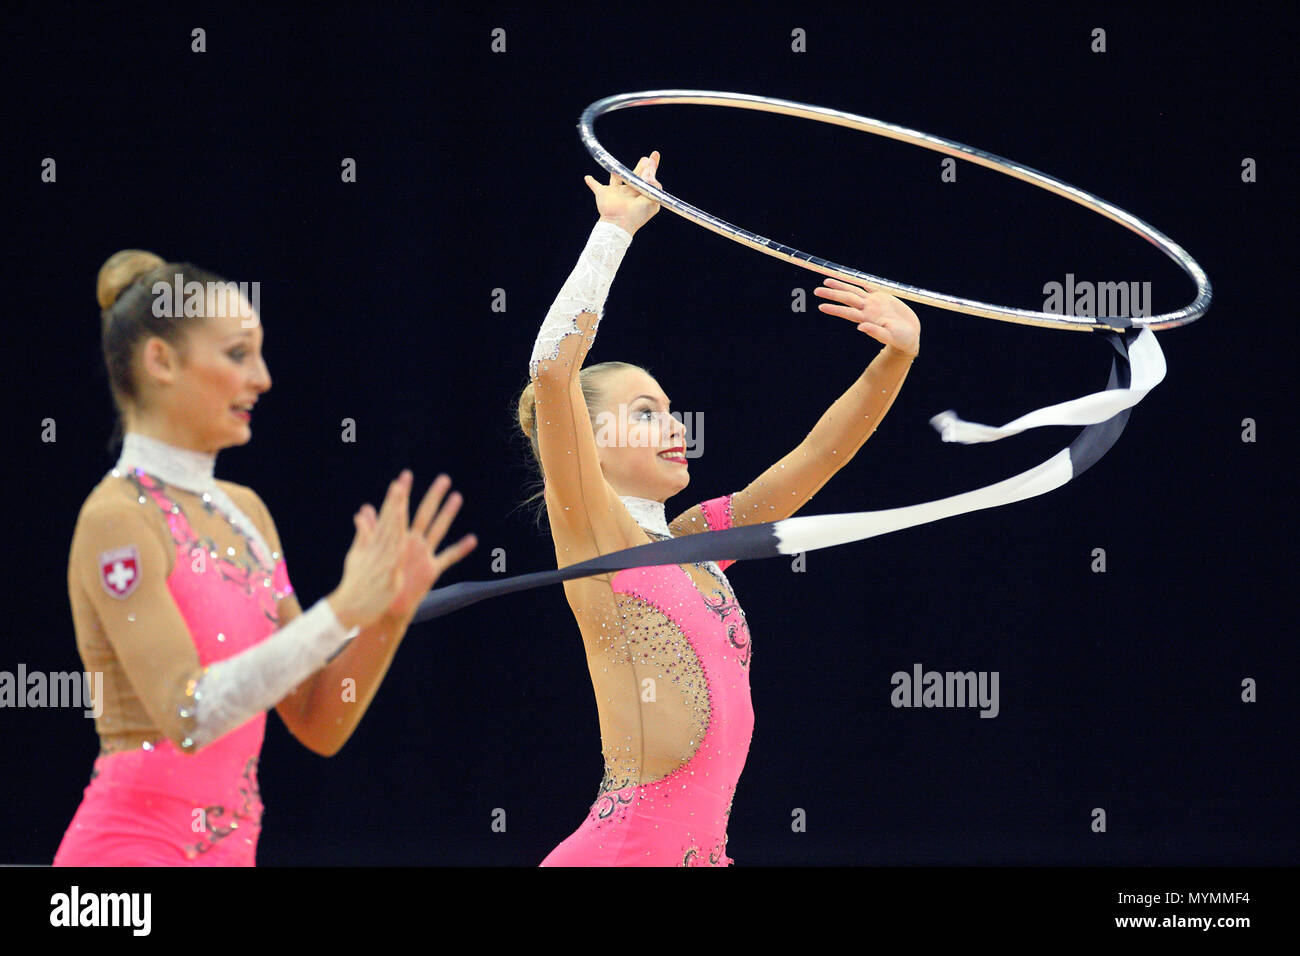 Visa Federation of International Gymnastics (FIG) - The team from Switzerland perform with the Ribbon and Hoop during the Women's Group Rhythmic Final Olympic qualification event at the O2 Arena London 18 January 2012 --- Image by © Paul Cunningham Stock Photo